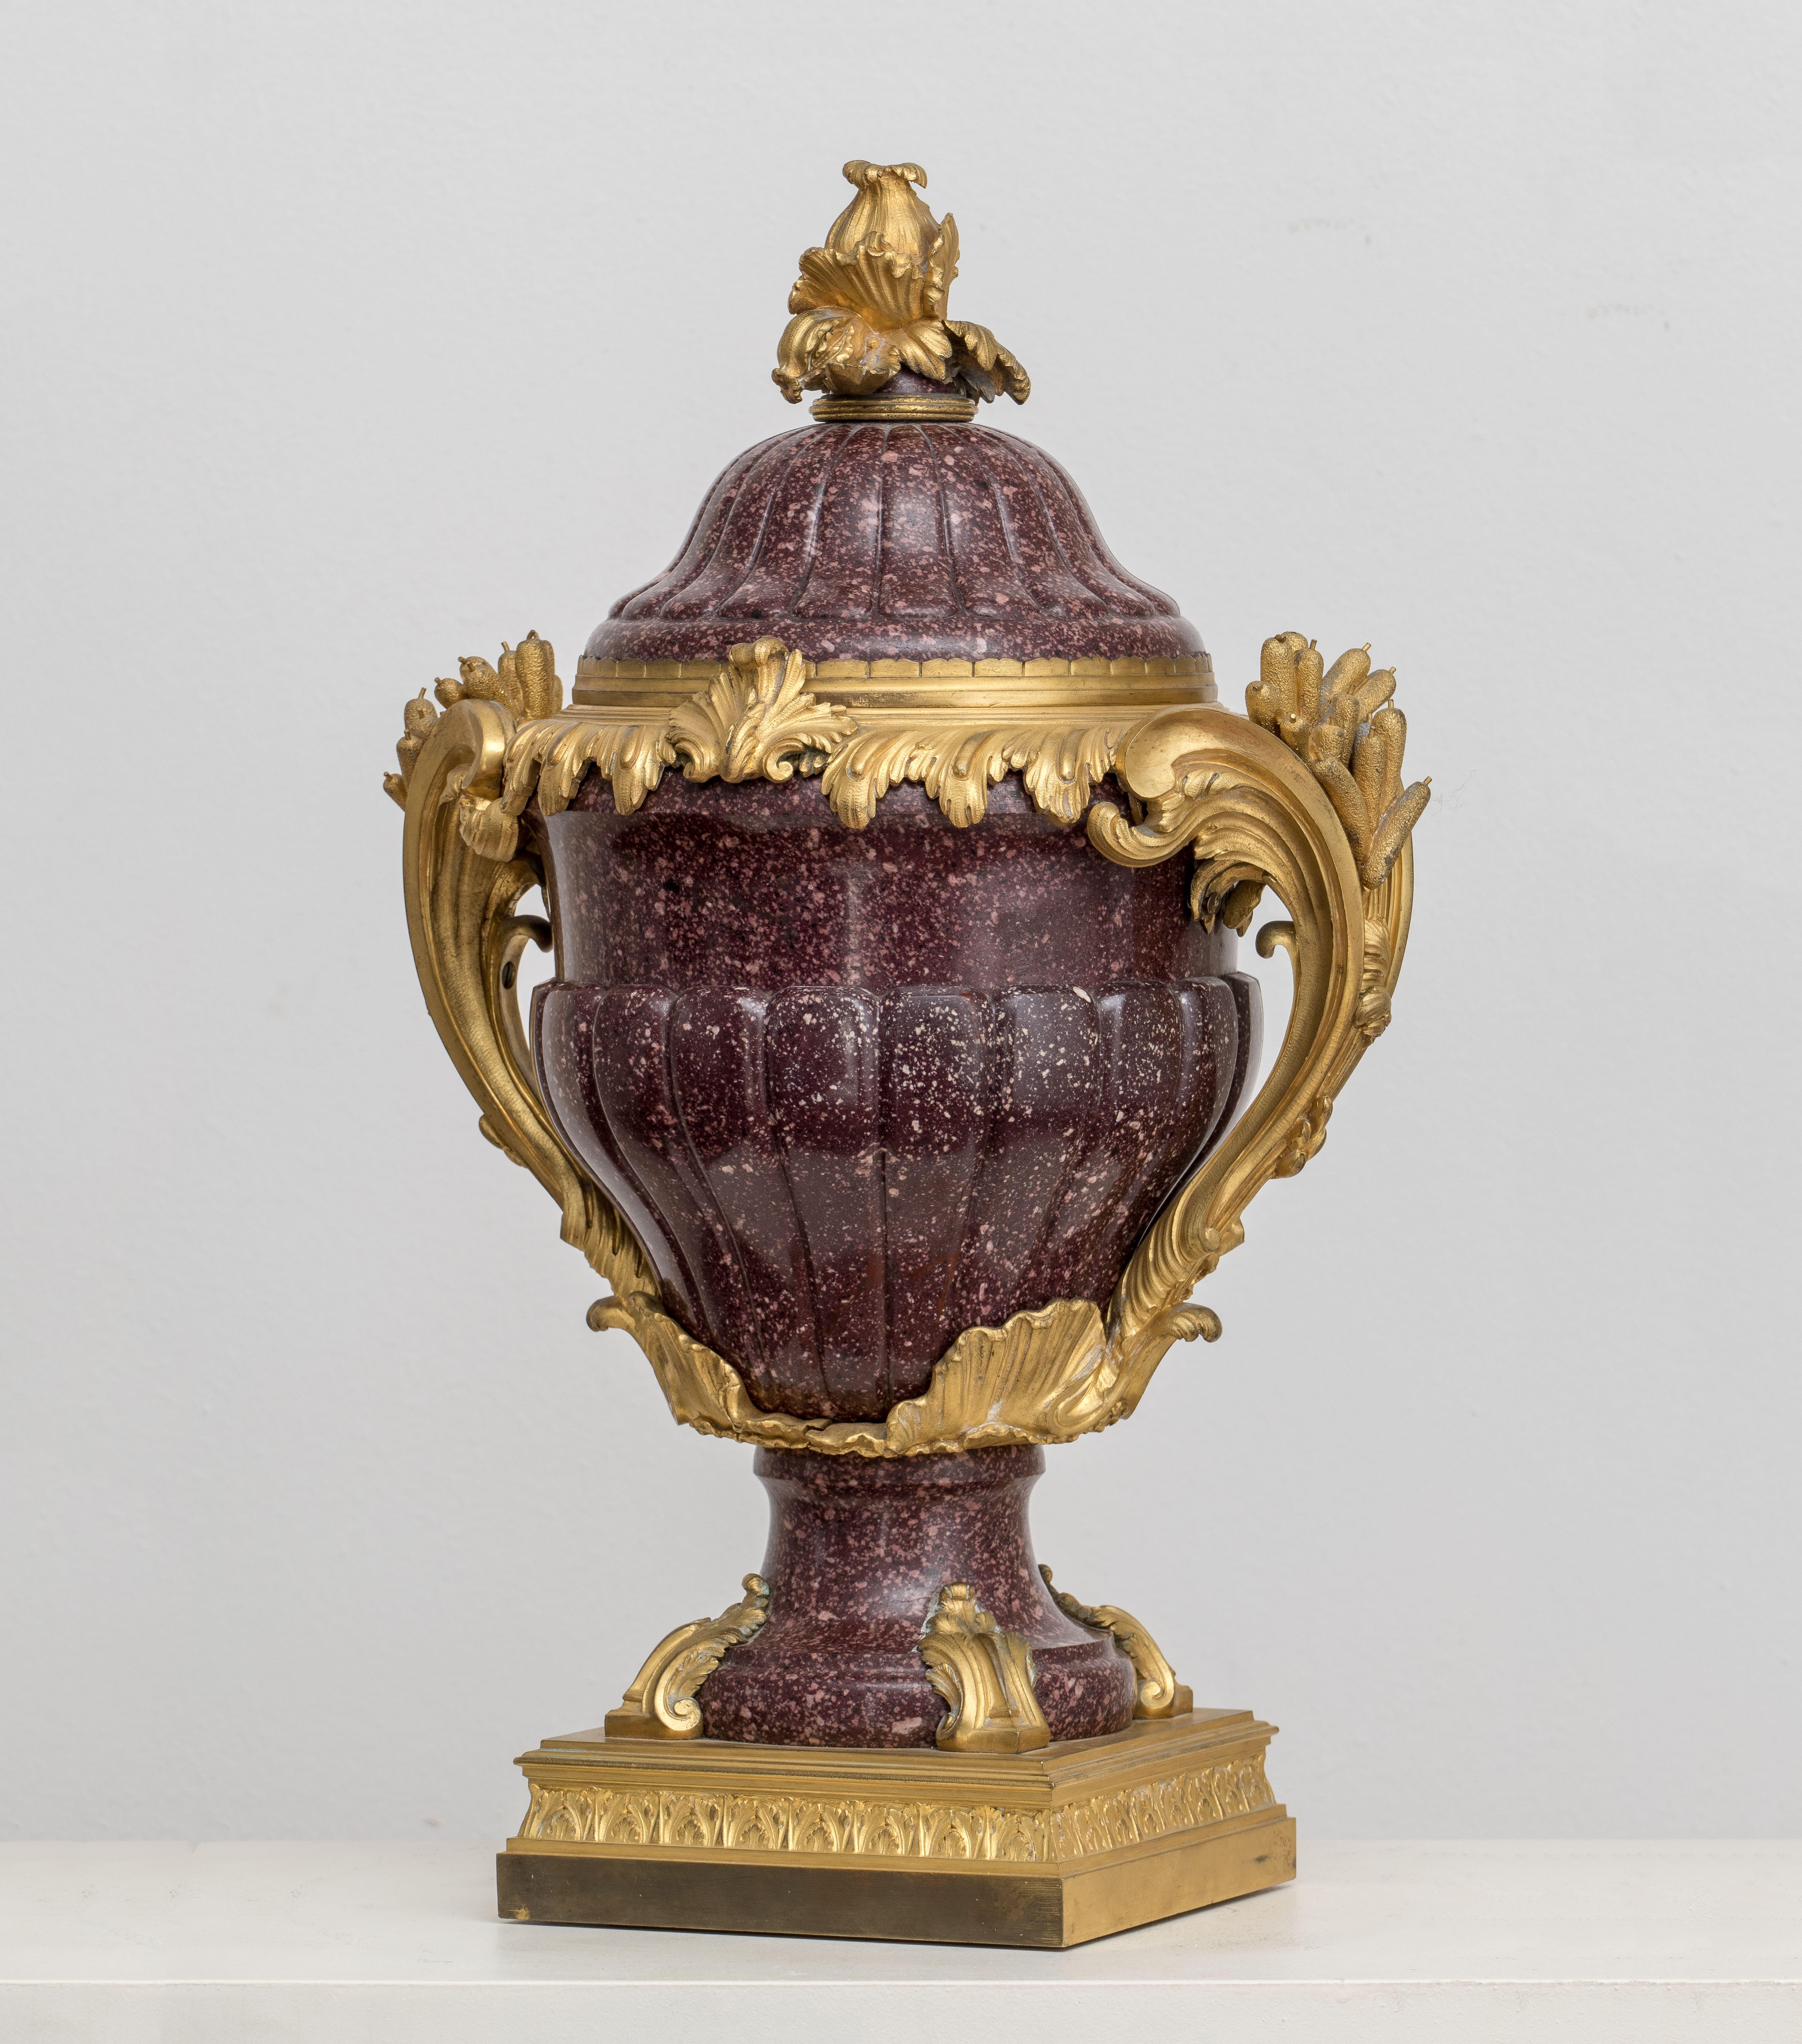 FRENCH MOUNTED PORPHYRY VASE
France, 19th Century
Porphyry and gilt bronze mounts
46 x 28 cm
18 x 11 in